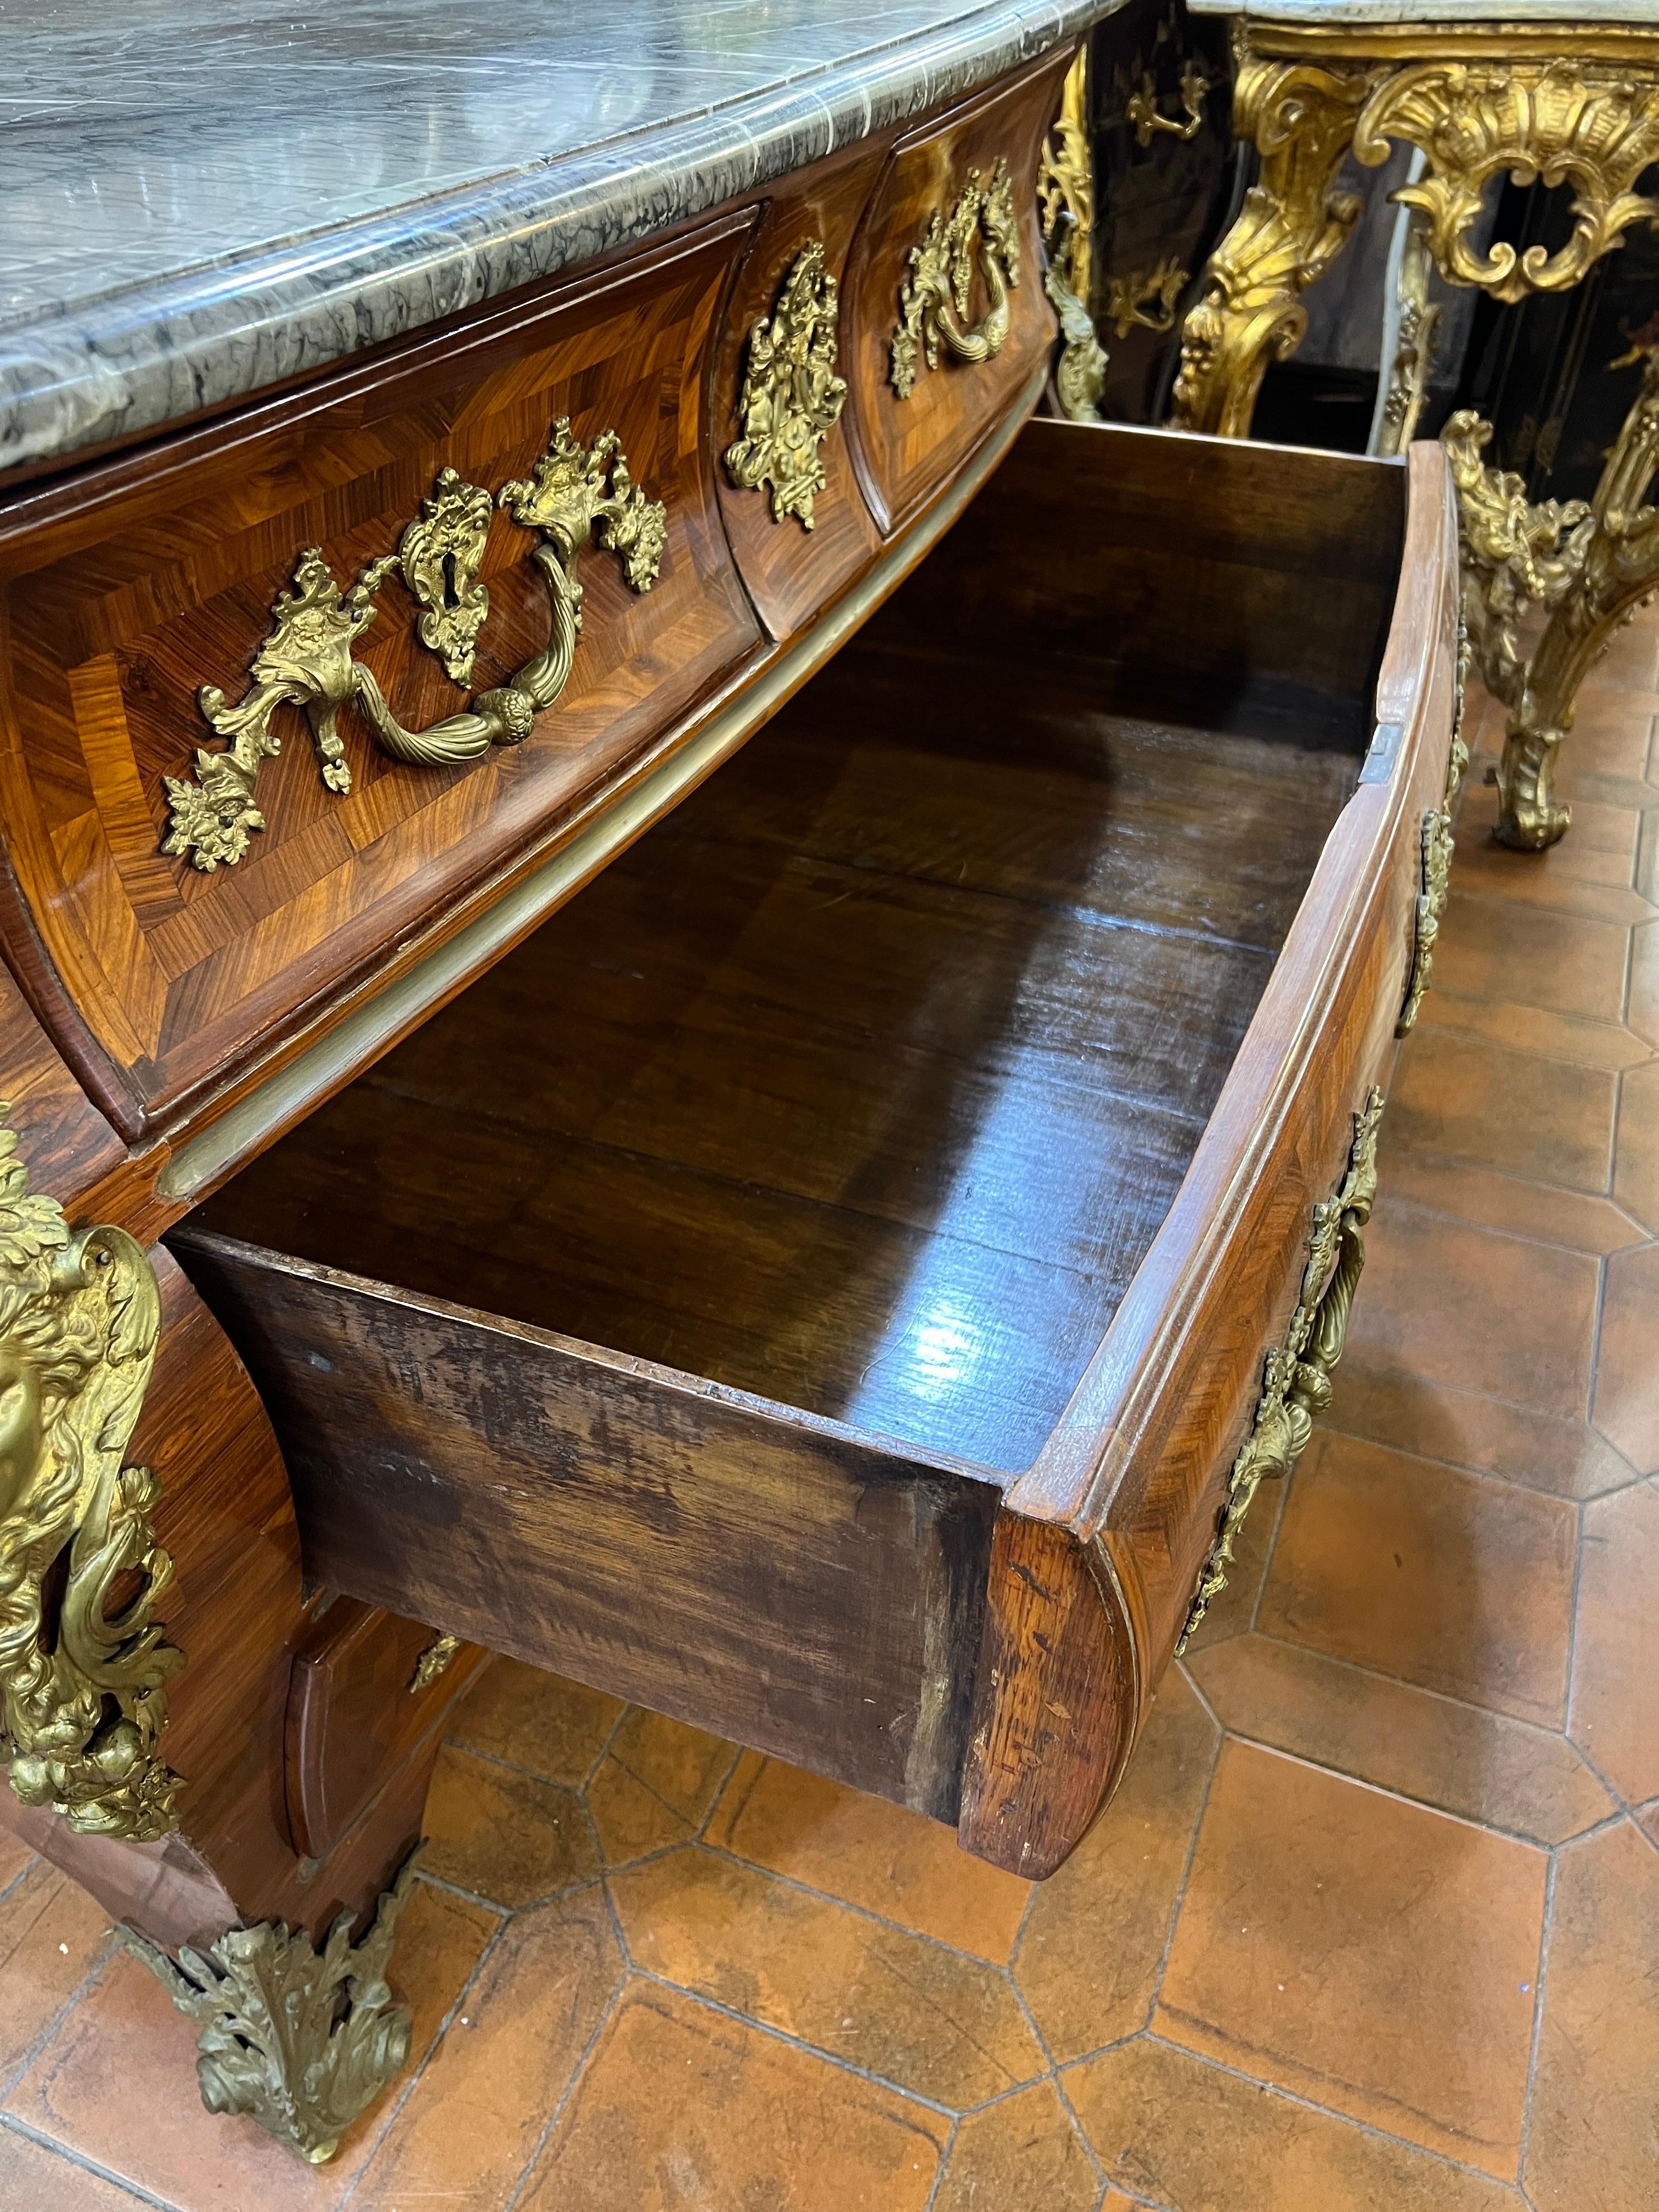 18th Century Important Wooden Commode of King Louis XV  by Pierre Migeon 1740 For Sale 8